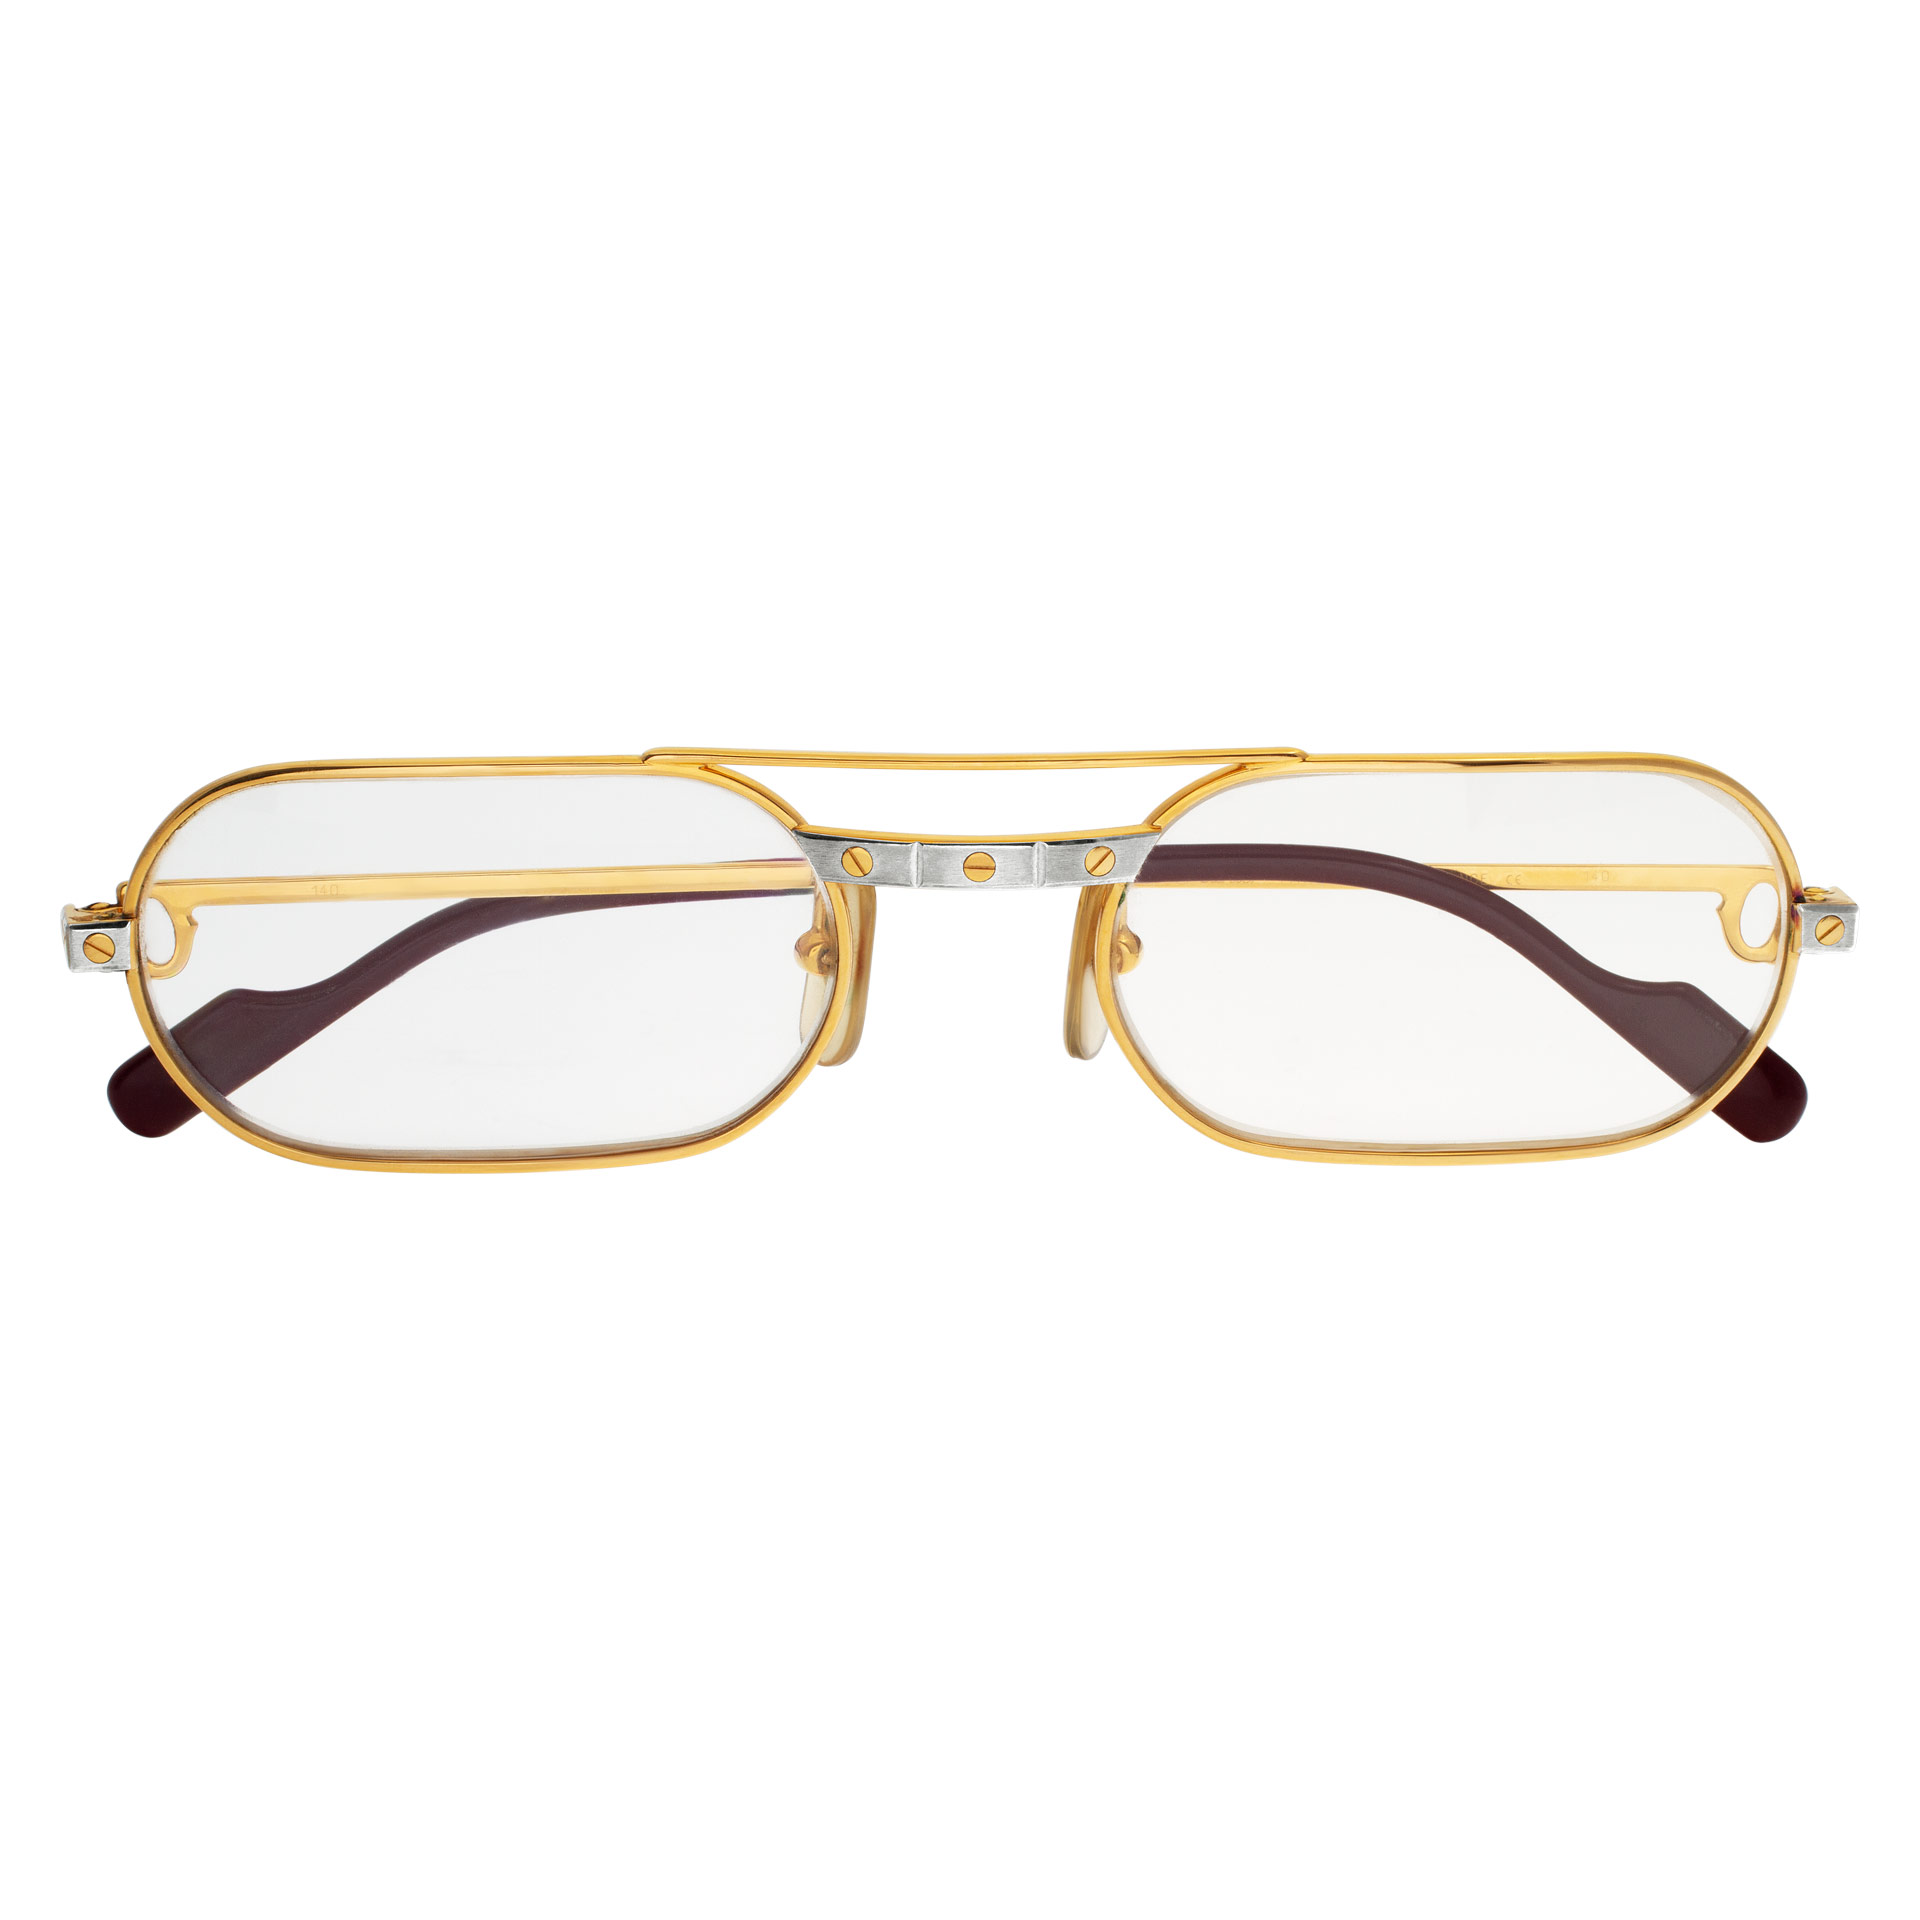 Cartier Santos glasses gold plated